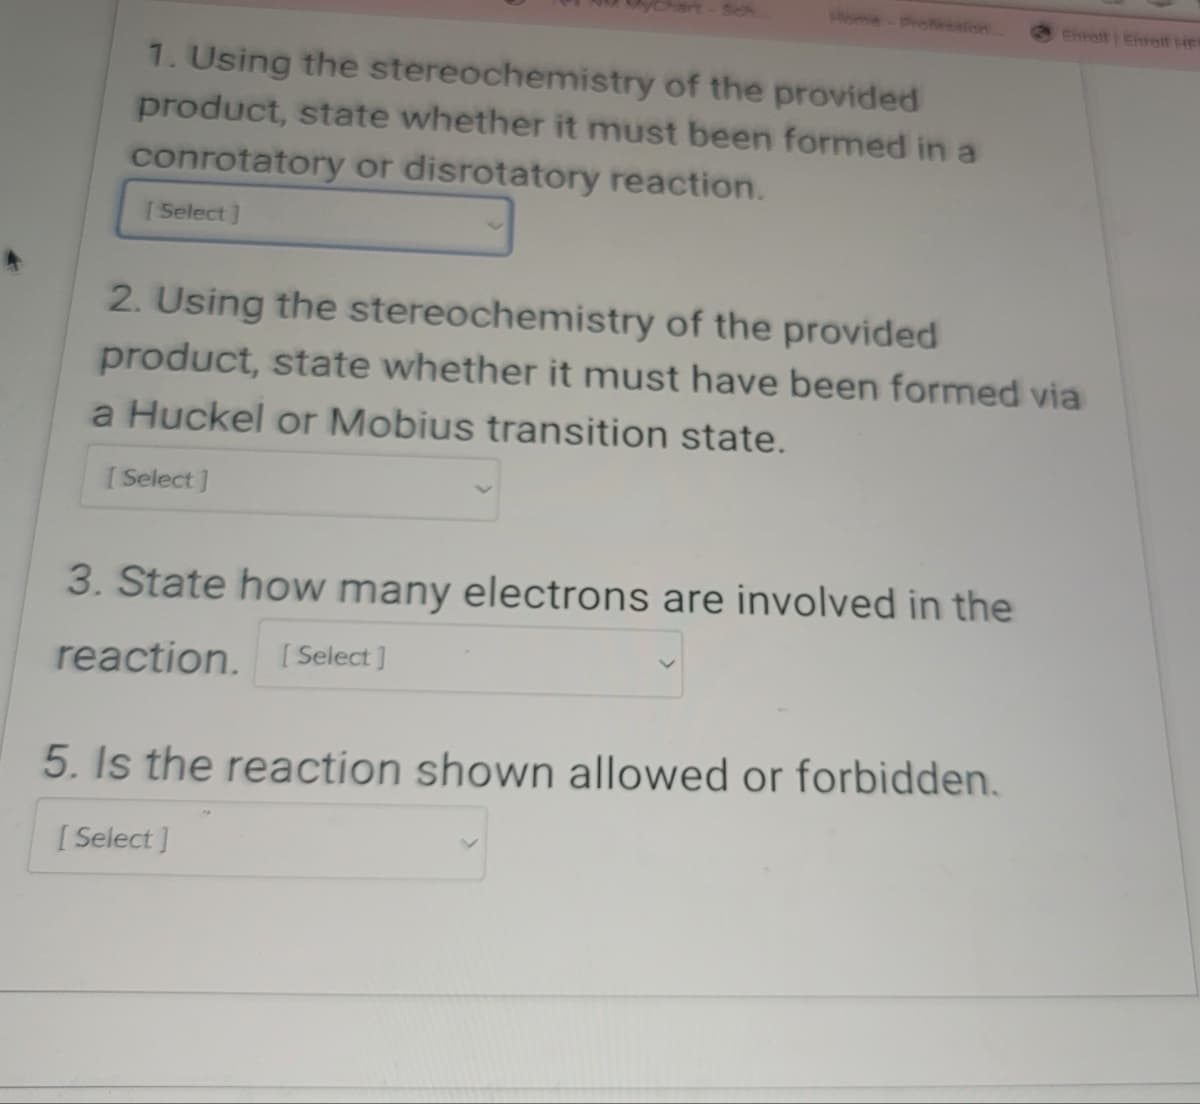 Sch
Home Profession
Enroll Enroll He
1. Using the stereochemistry of the provided
product, state whether it must been formed in a
conrotatory or disrotatory reaction.
[Select]
2. Using the stereochemistry of the provided
product, state whether it must have been formed via
a Huckel or Mobius transition state.
[Select]
3. State how many electrons are involved in the
reaction. [Select]
5. Is the reaction shown allowed or forbidden.
[Select]